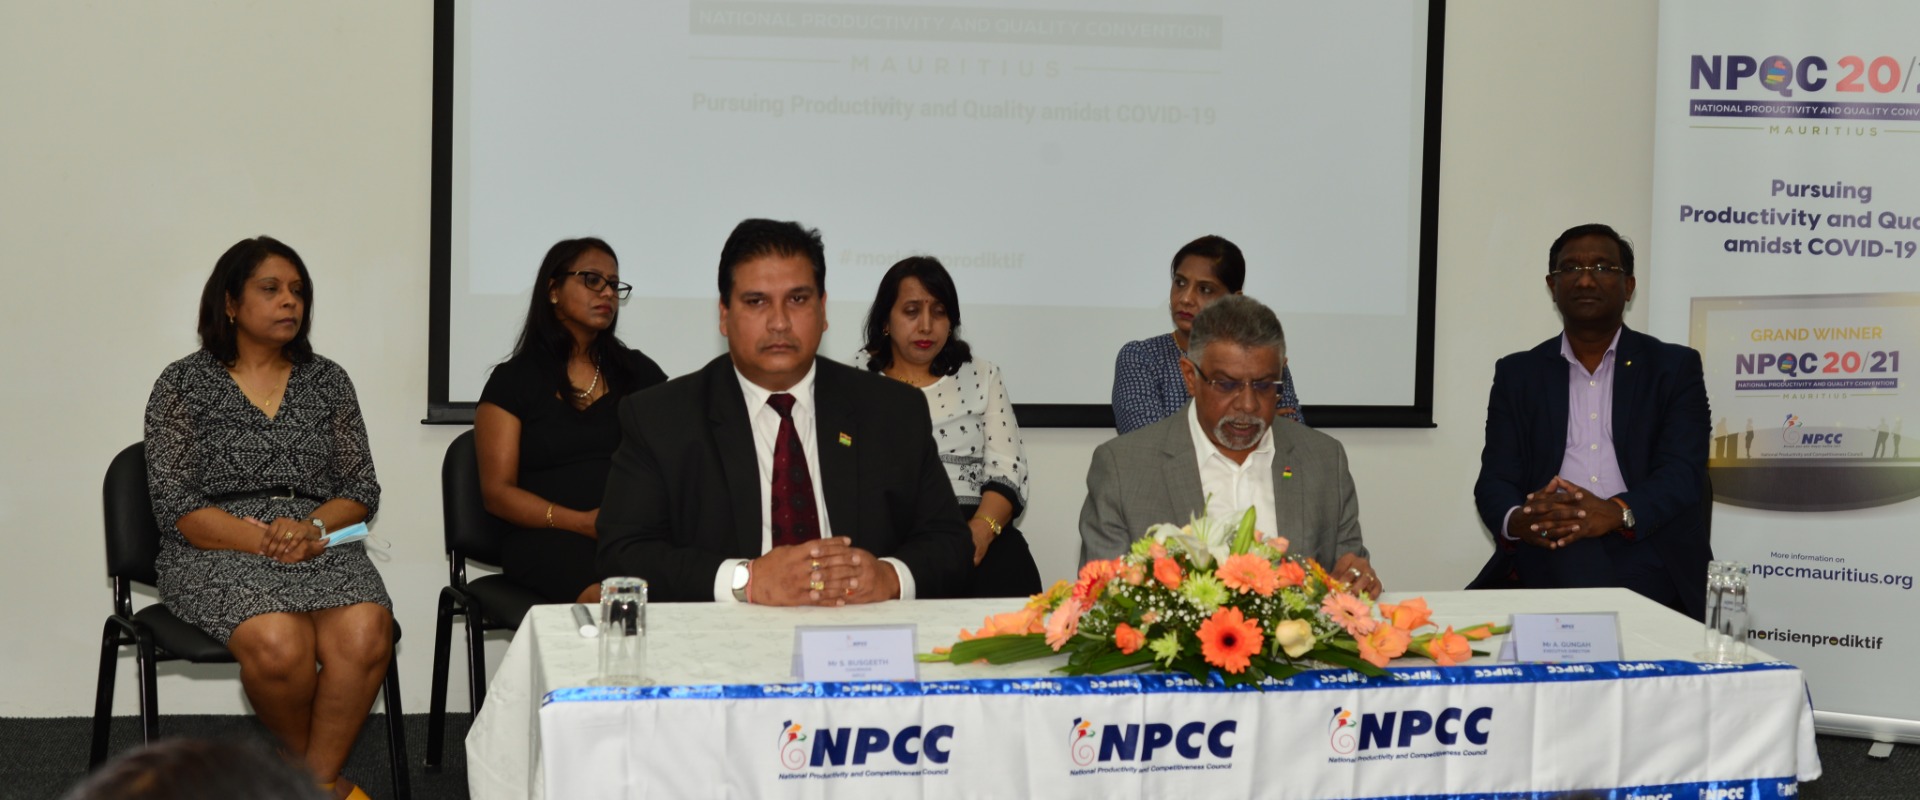 NPCC launches third edition of National Productivity and Quality Convention (NPQC) 